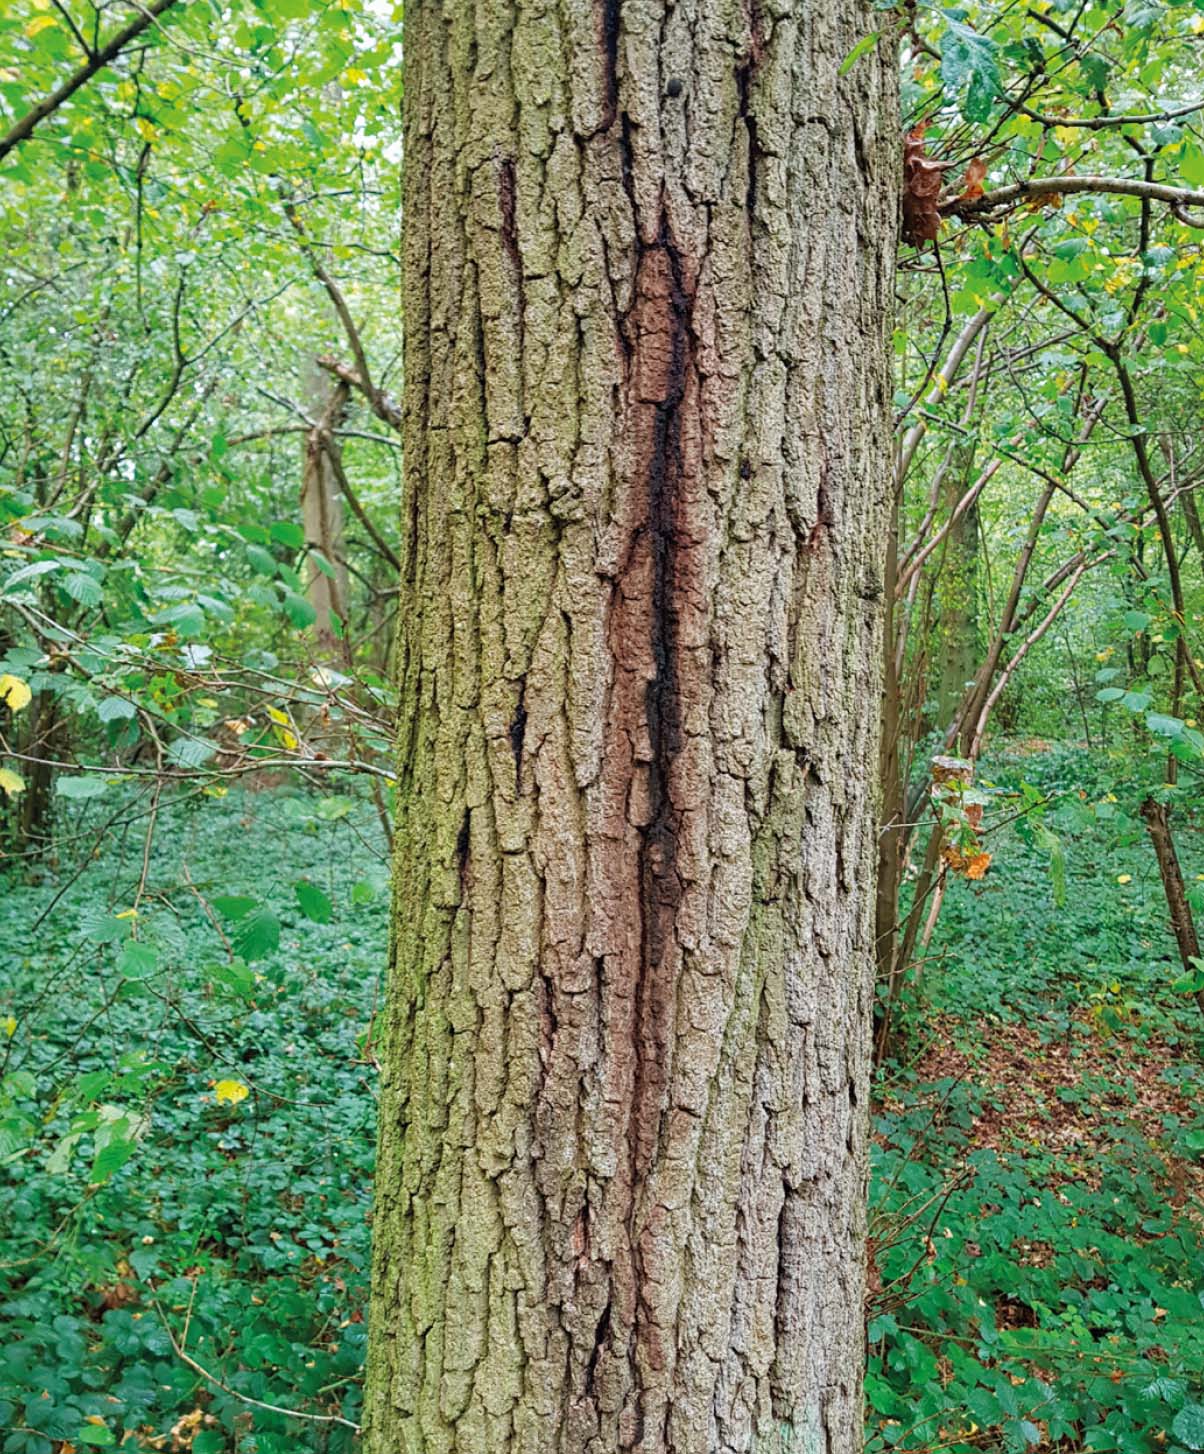 Figure 9: An AOD-affected oak. Black liquid runs out from between the bark plates at multiple locations on the stem. (© Nathan Brown)